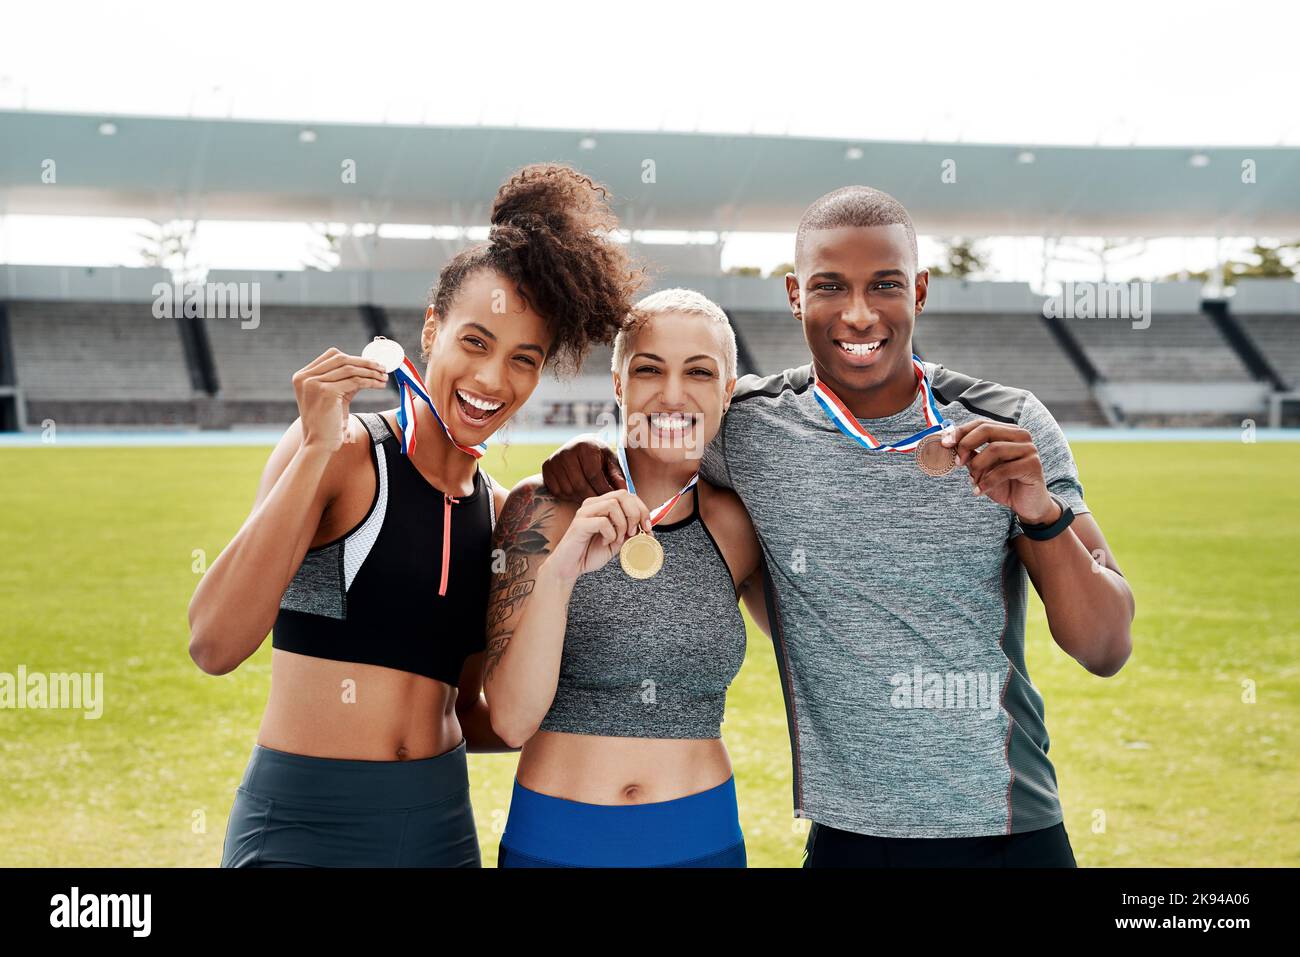 We are champions. Cropped portrait of a diverse group of athletes standing together and holding up medals after winning a running race. Stock Photo